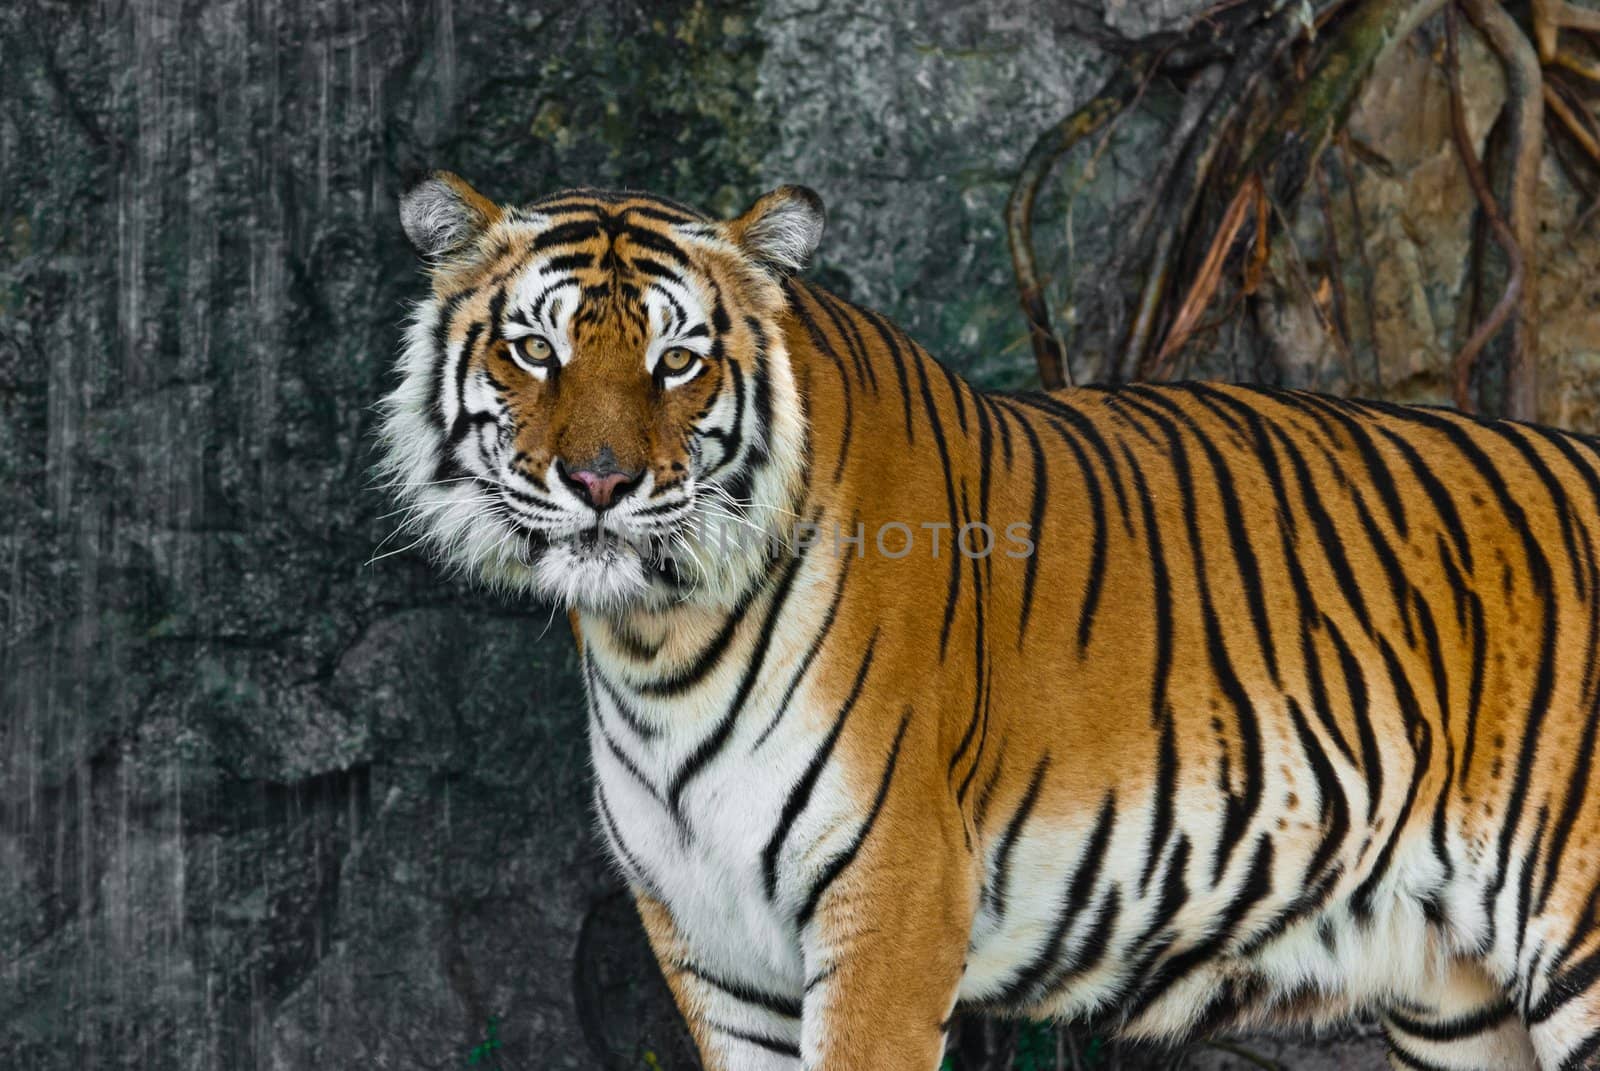 Female wild tiger from Thailand, taken in a sunny day, can be use for related wild animal concepts and conservation print outs.